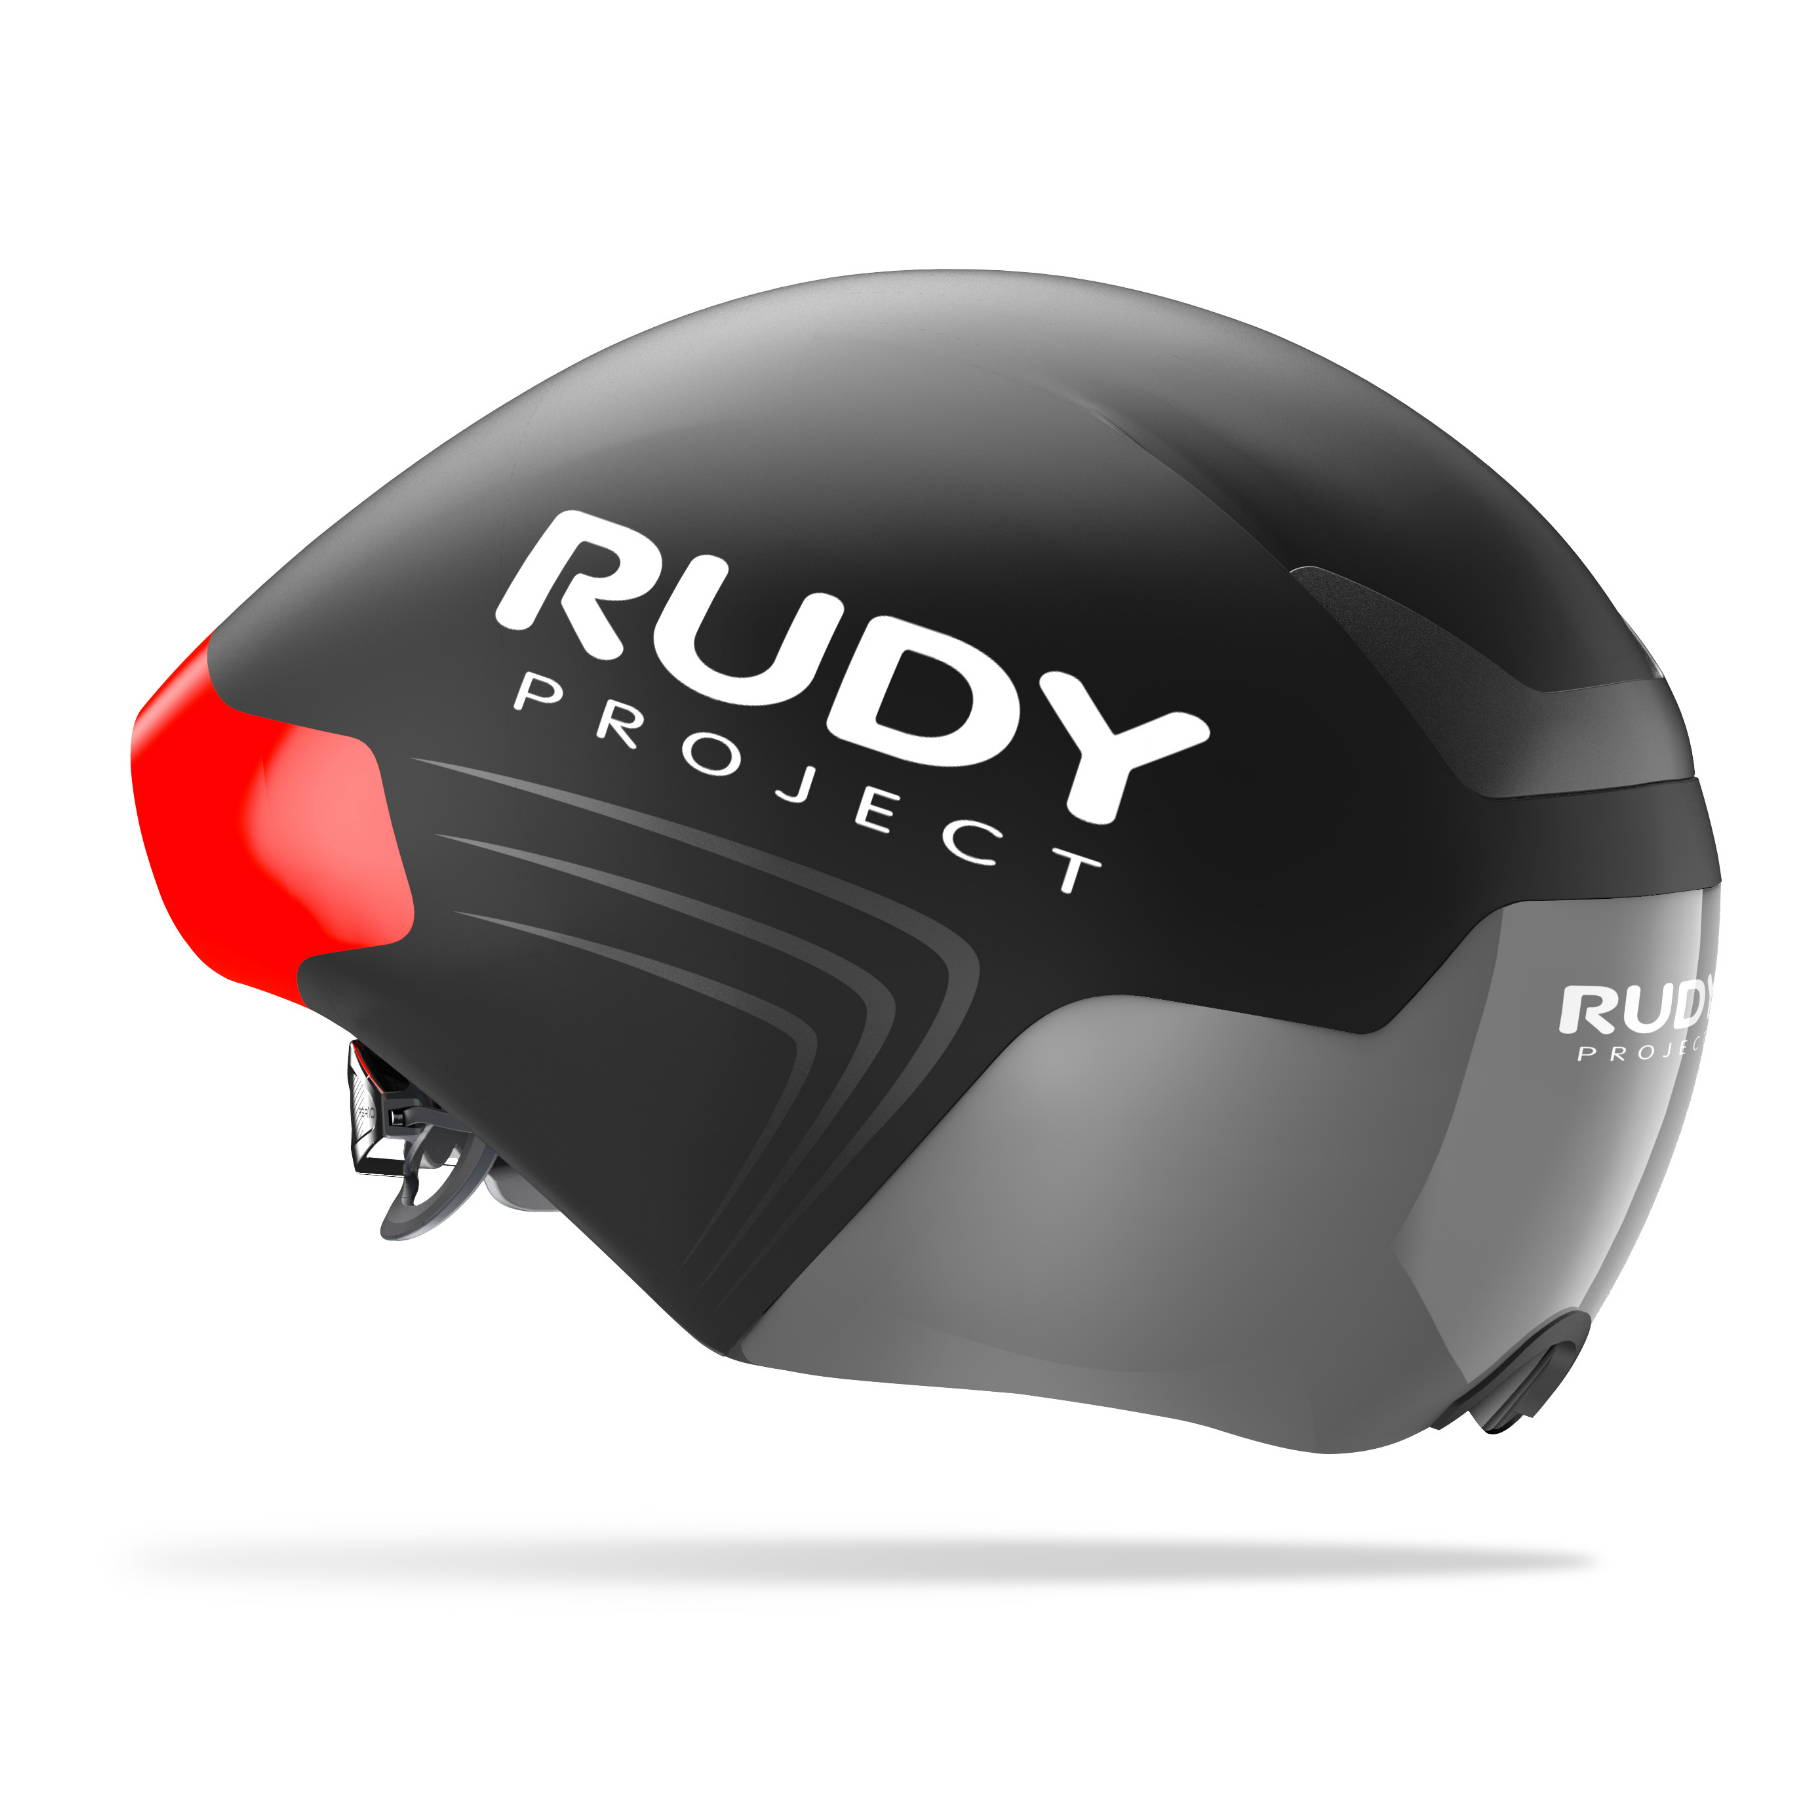  Matte Black-Neon Yellow Rudy Project WING57 Time Trial Helmet 